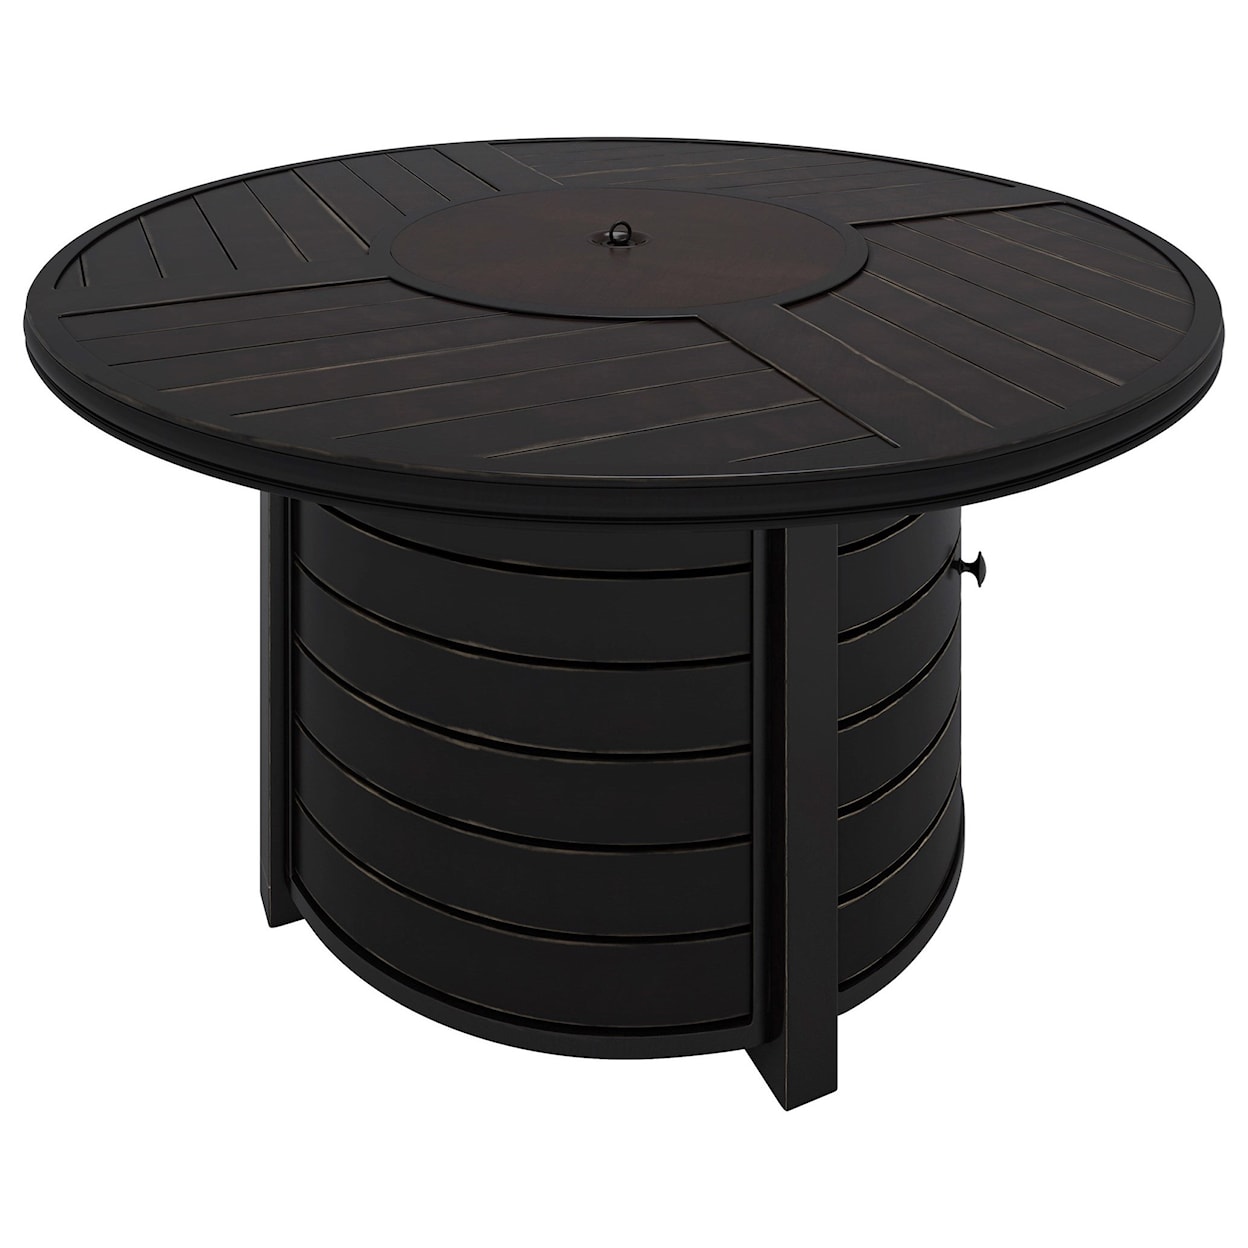 Signature Design by Ashley Castle Island Round Fire Pit Table